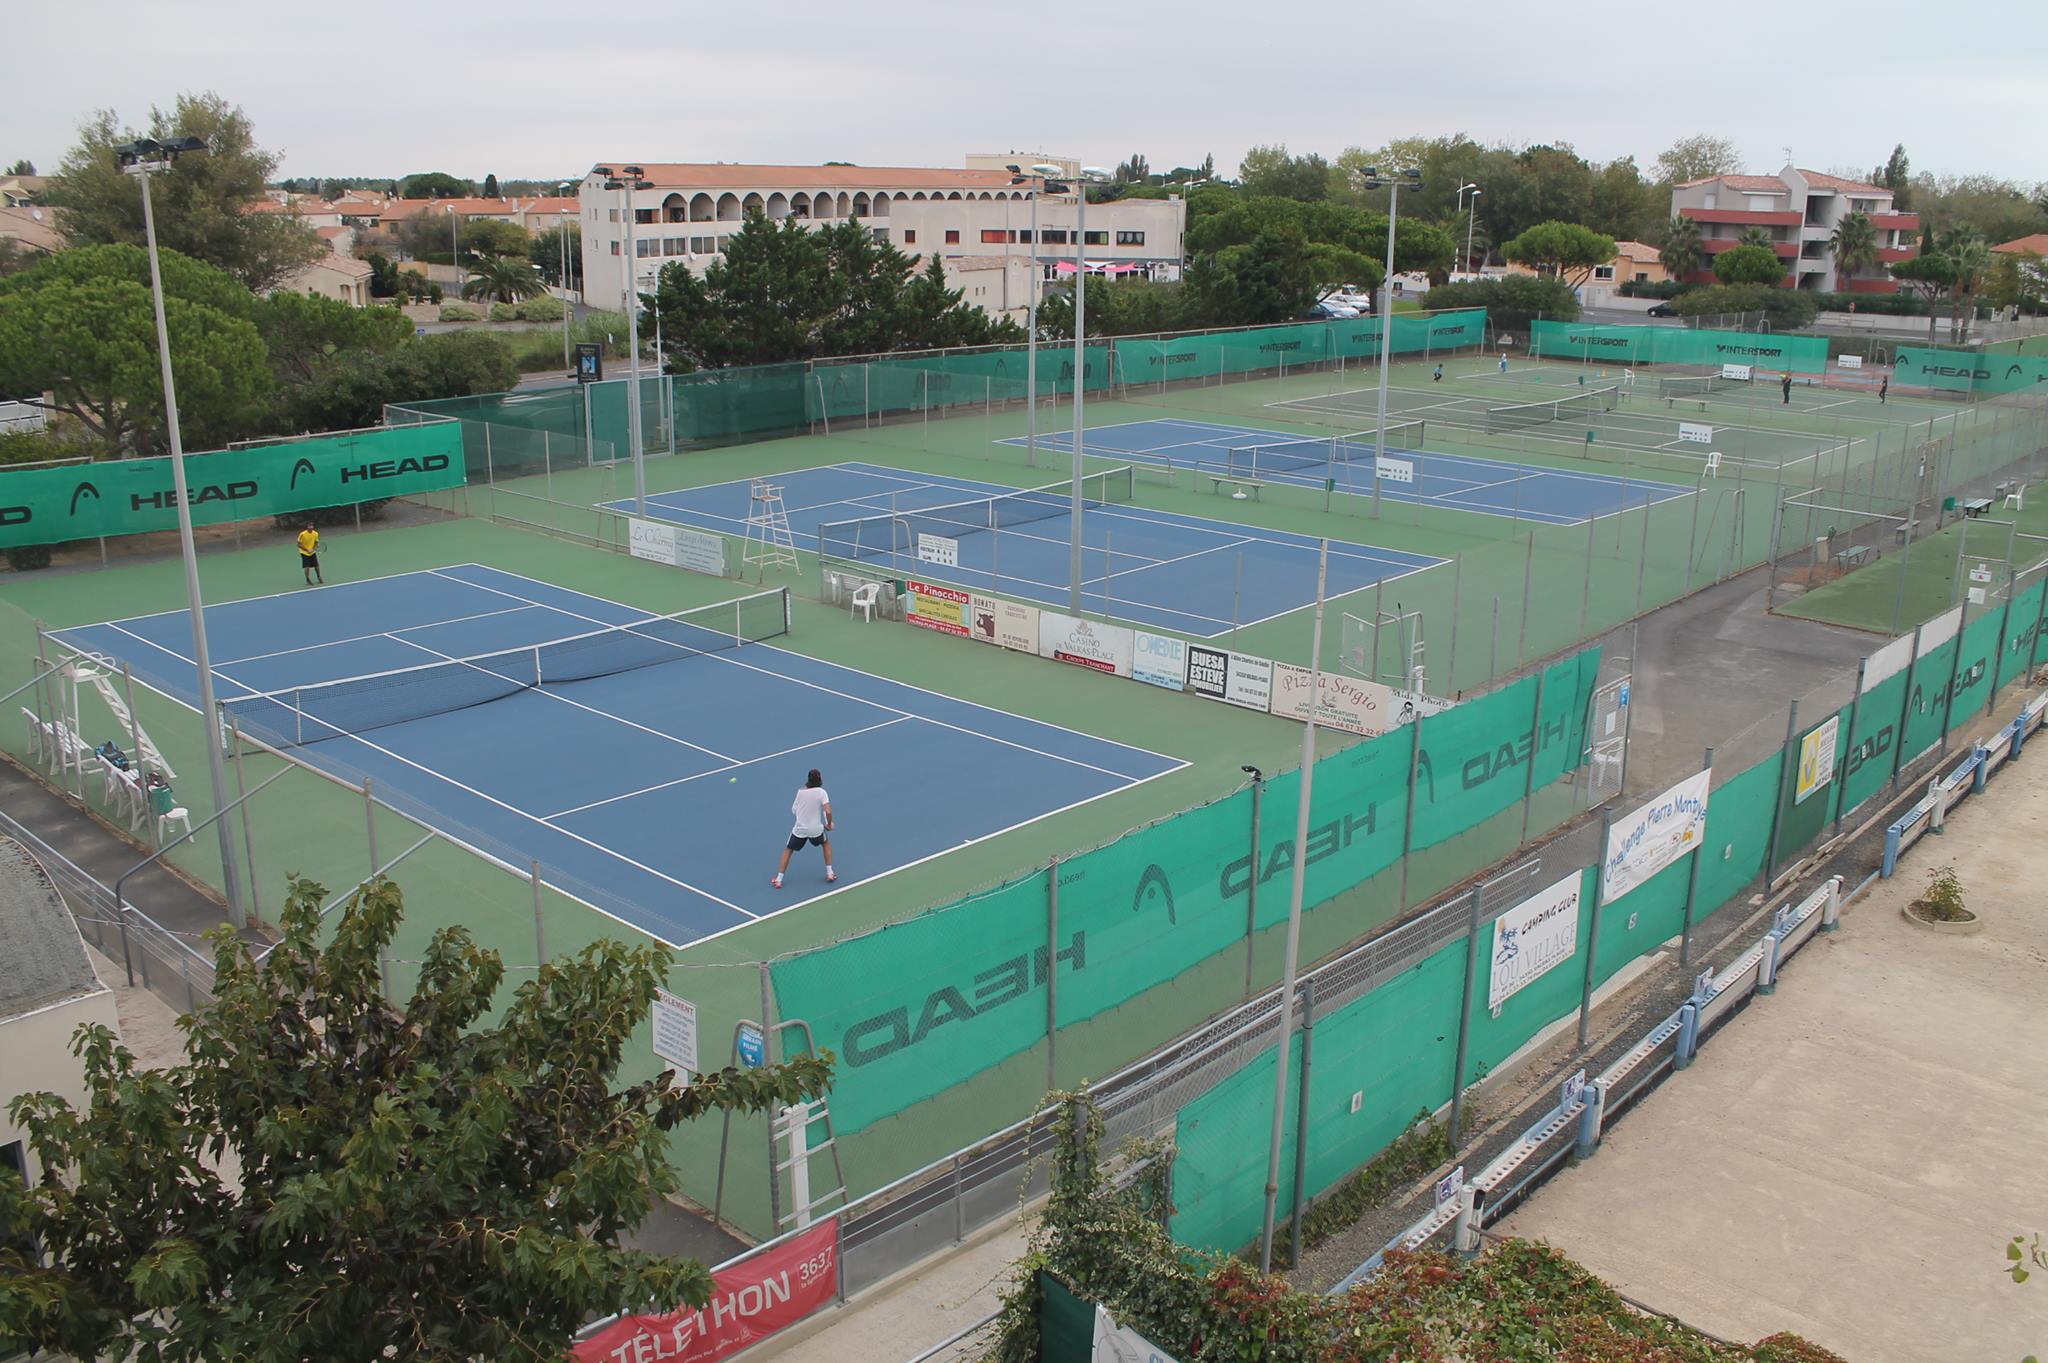 The Valras club prepares the National Padel Cup